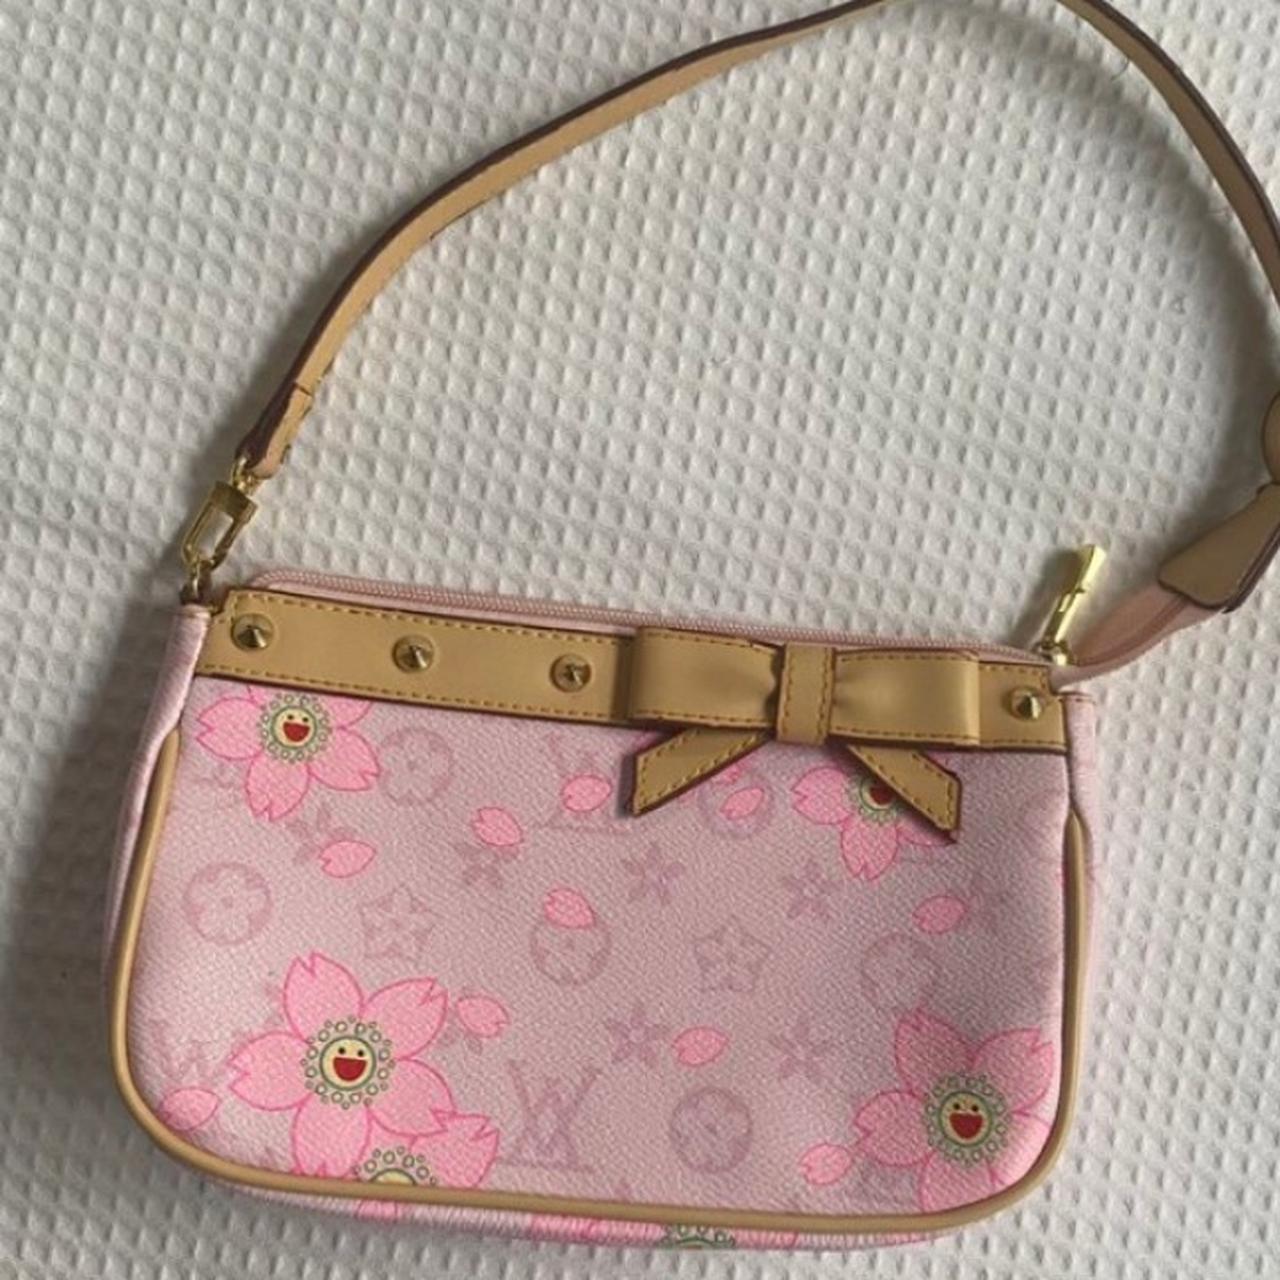 ISO non authentic lv bags like this one, will pay... - Depop